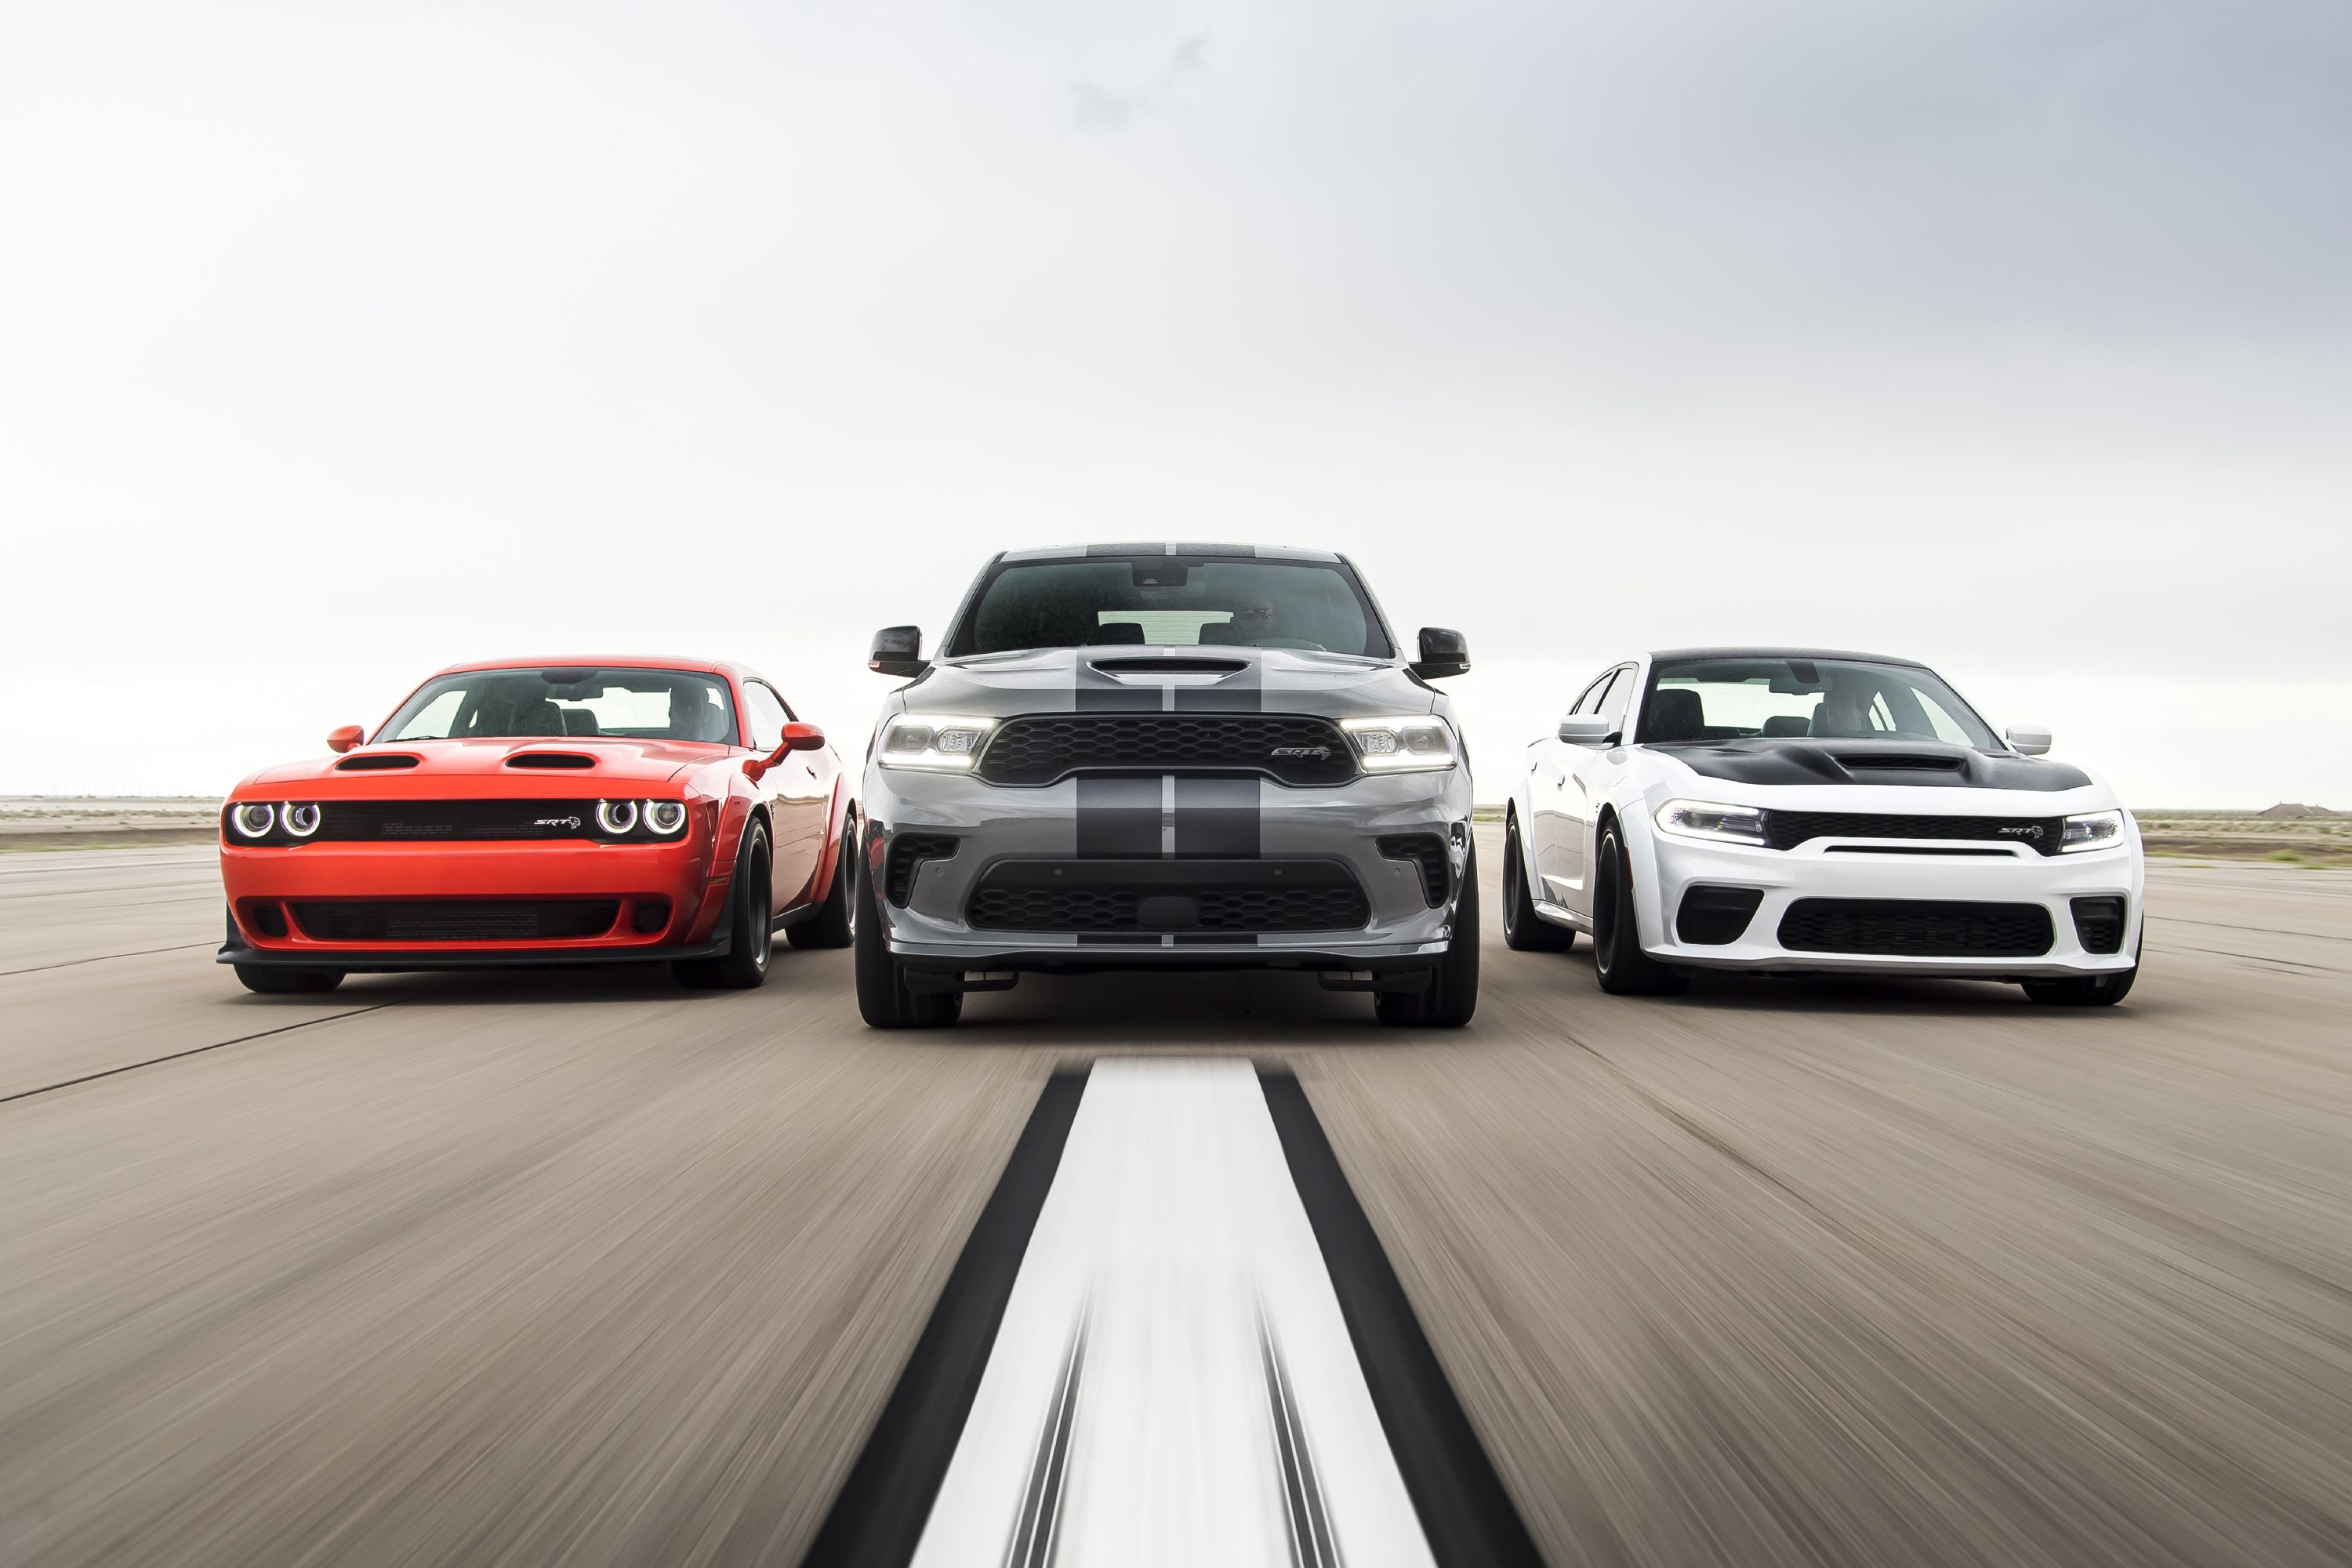 dodge new models 2021 4 New Dodge Vehicles with at Least 4 HP Coming for 4